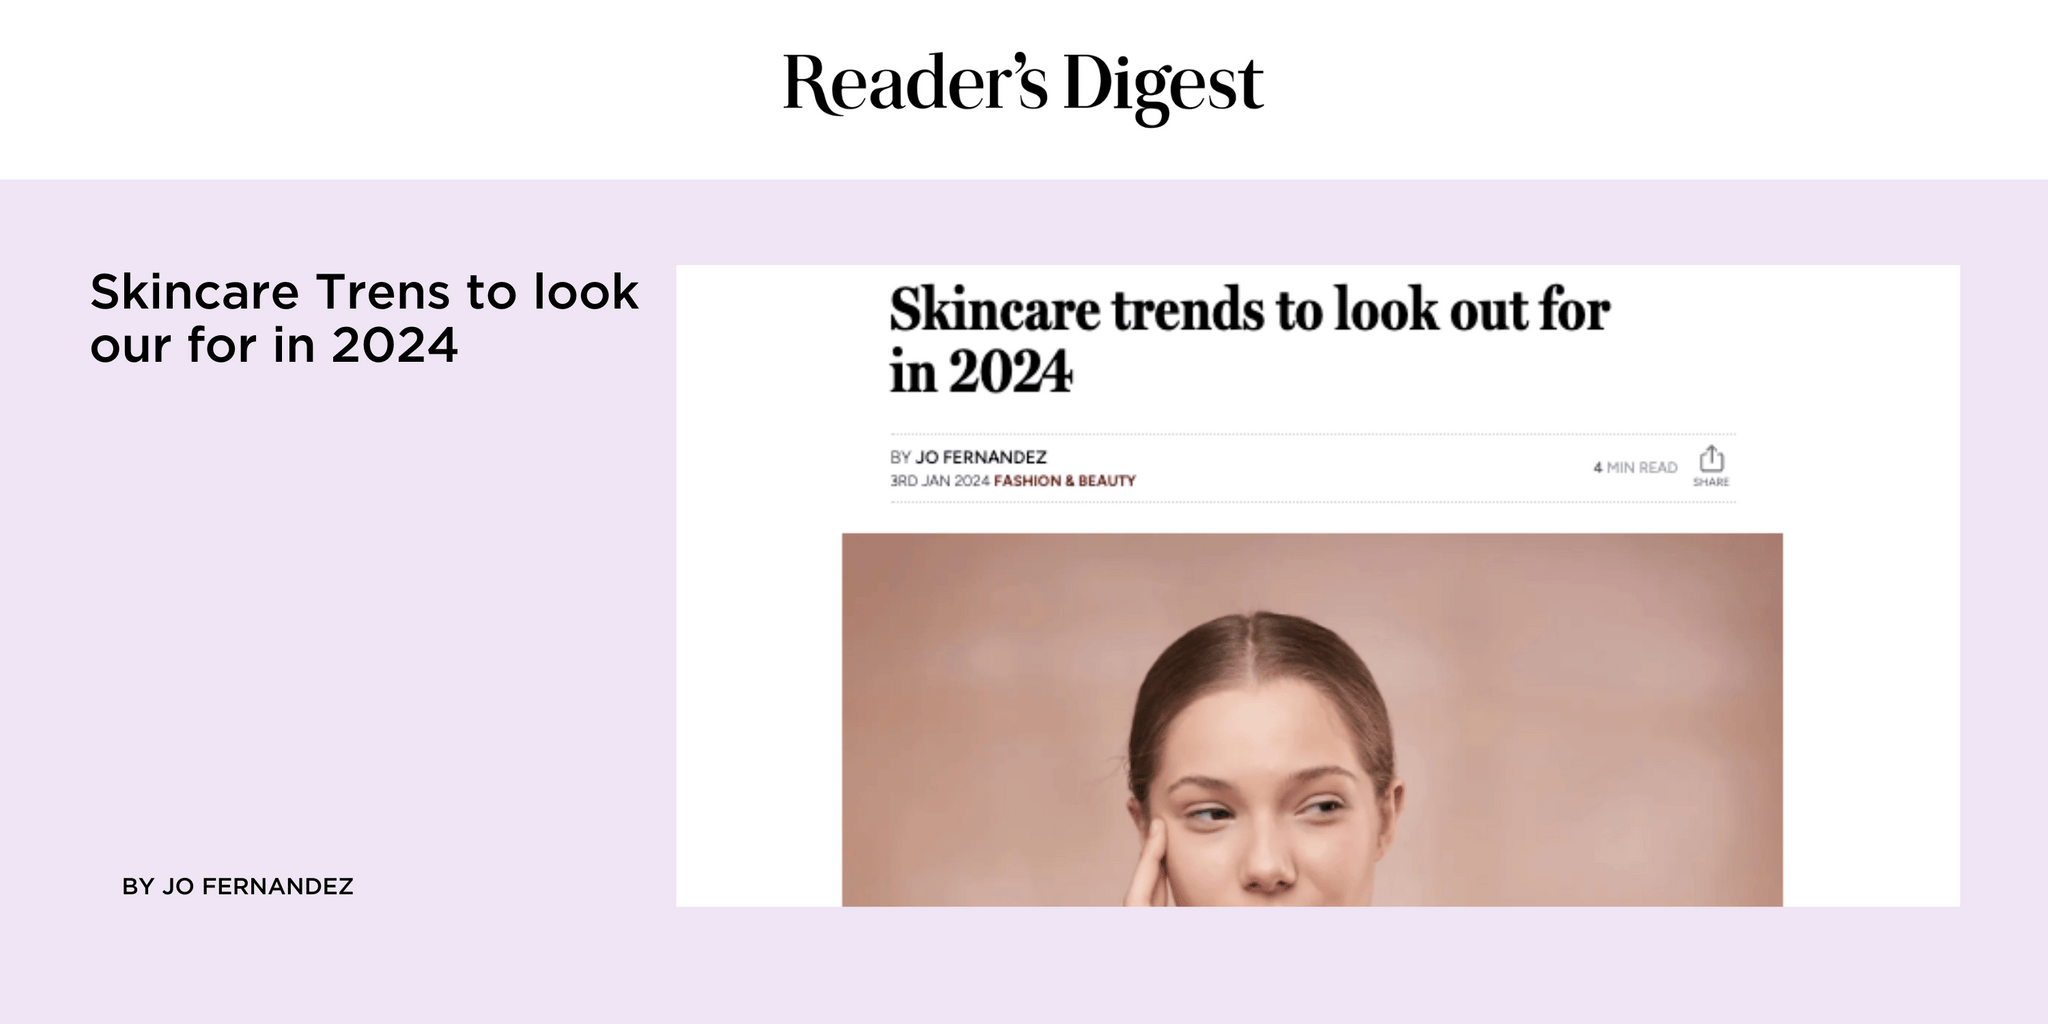 Skincare trends to look out for in 2024